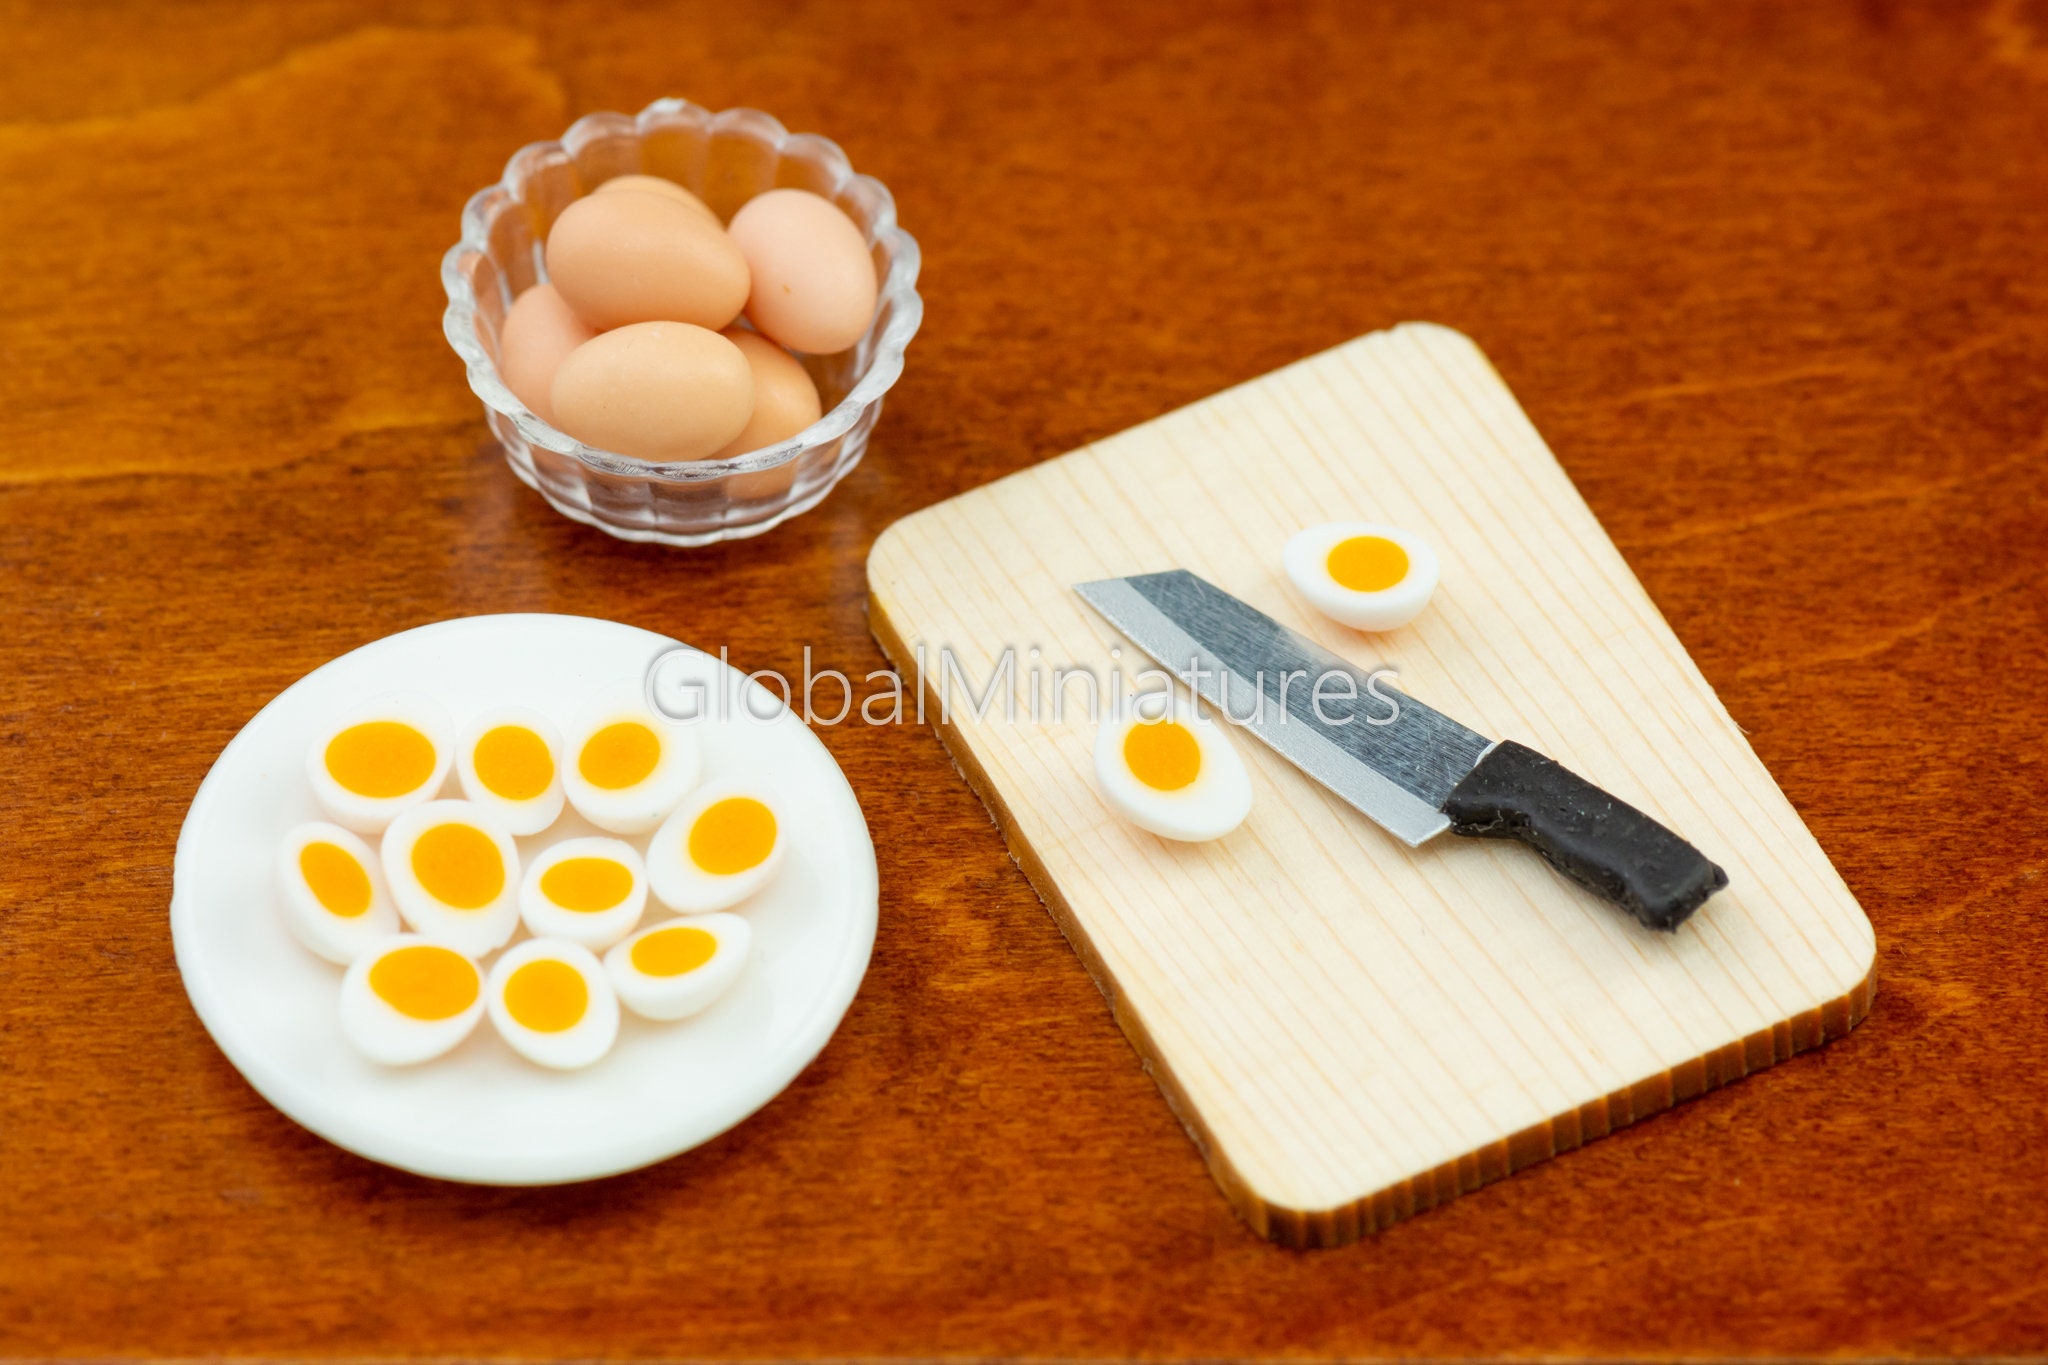 Dollhouse Miniature Breakfast 1:6 Pastry and Spoon Soft Boiled Egg in Cup